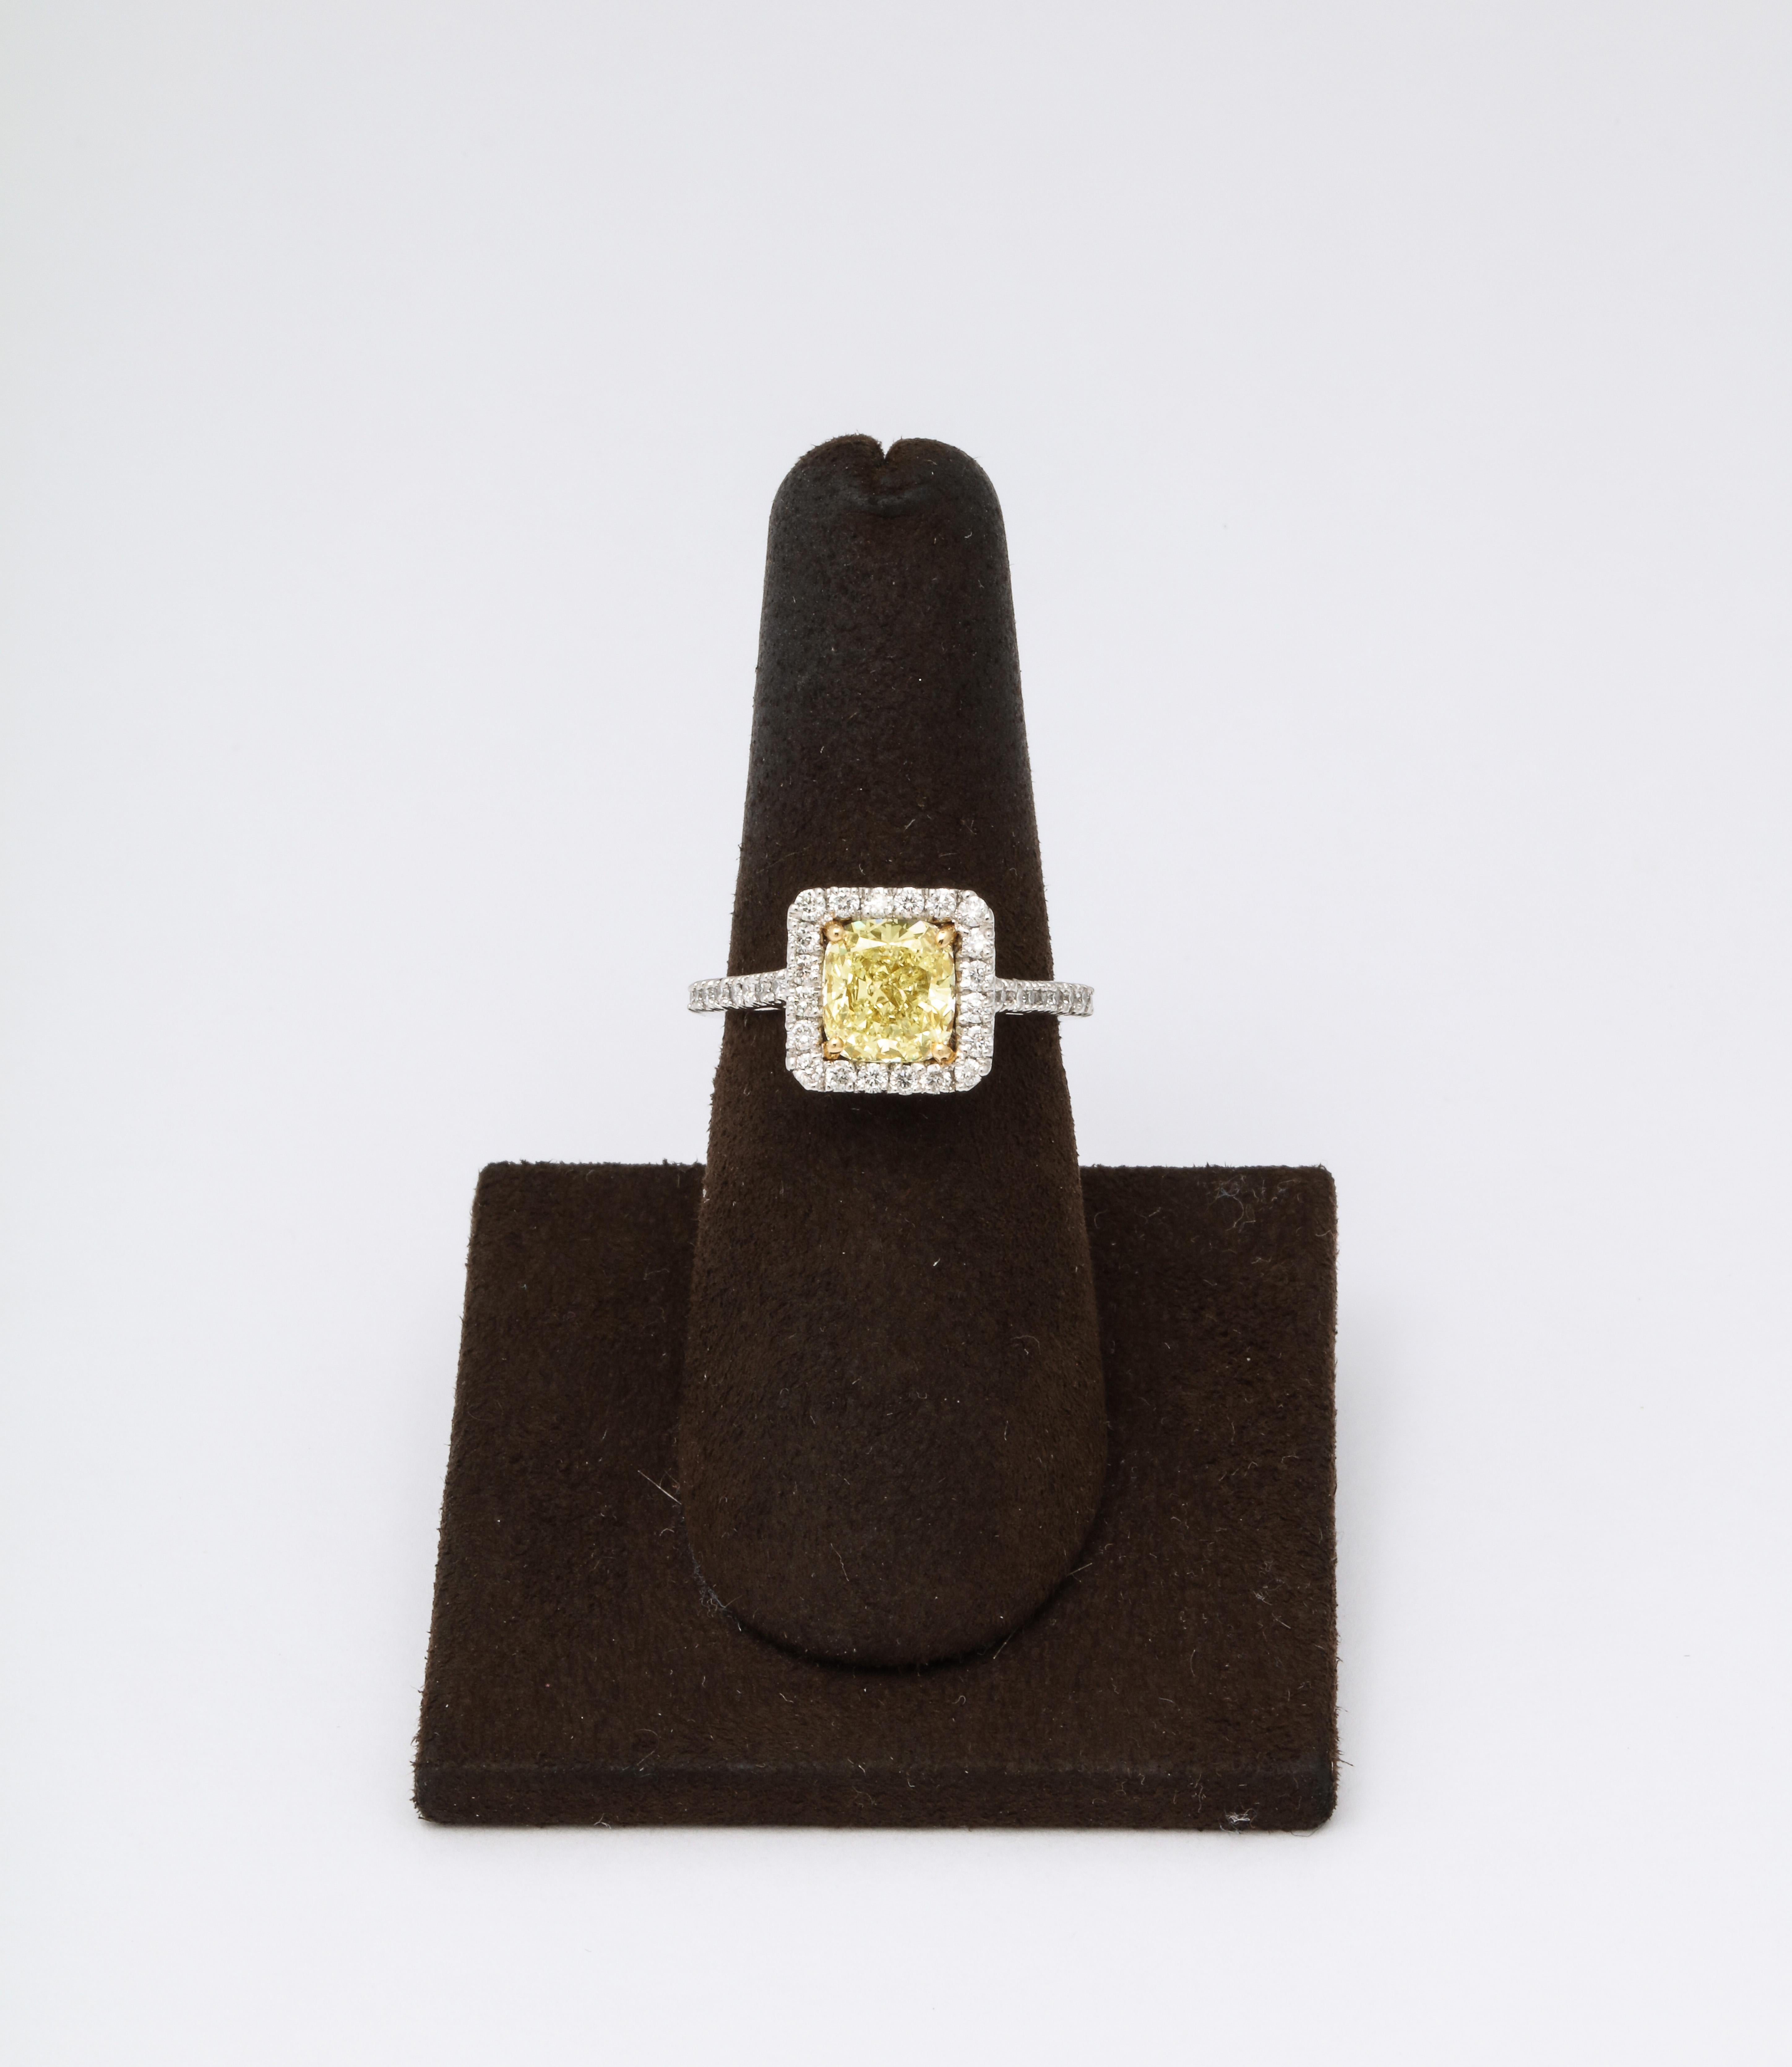 A gorgeous yellow diamond ring!!

1.71 carat GIA certified Cushion cut Fancy Light Yellow, VS1 clarity yellow center diamond.

.52 carats of white round brilliant cut diamonds set in a custom platinum and 18k yellow gold halo mounting. 

Currently a